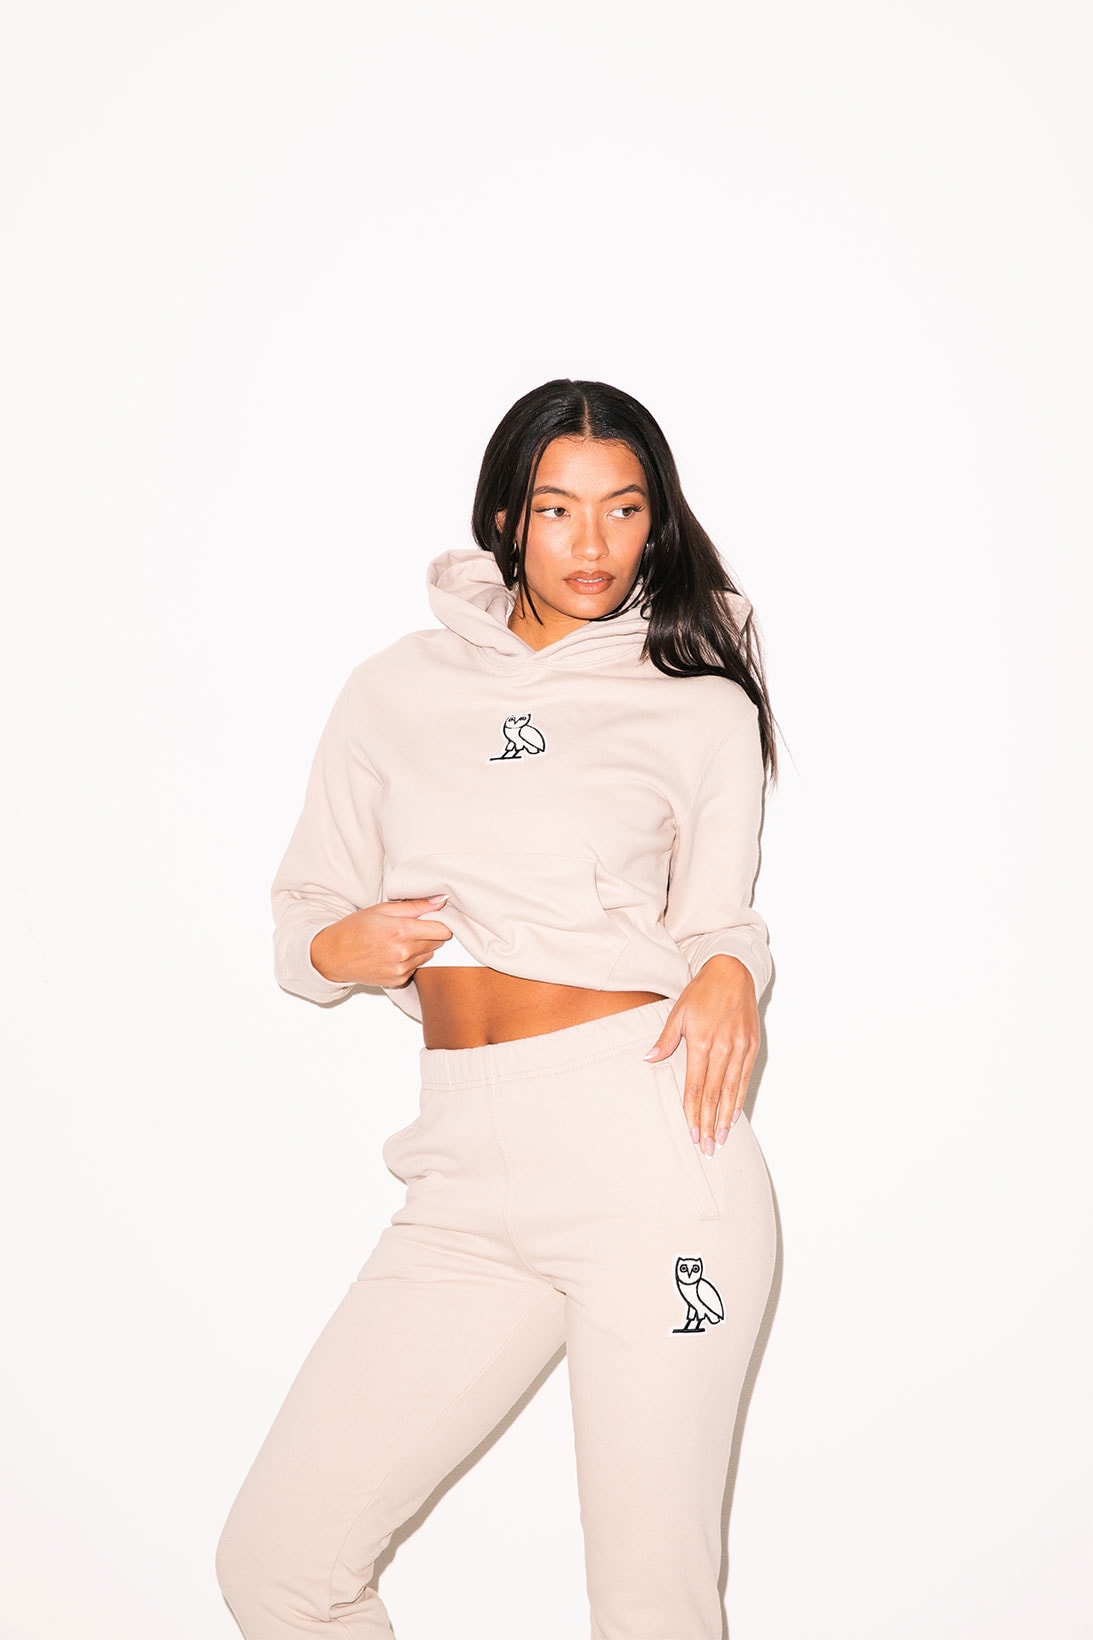 Drake OVO October's Very Own Womenswear Capsule Denim Velour Tracksuit Release Where to buy